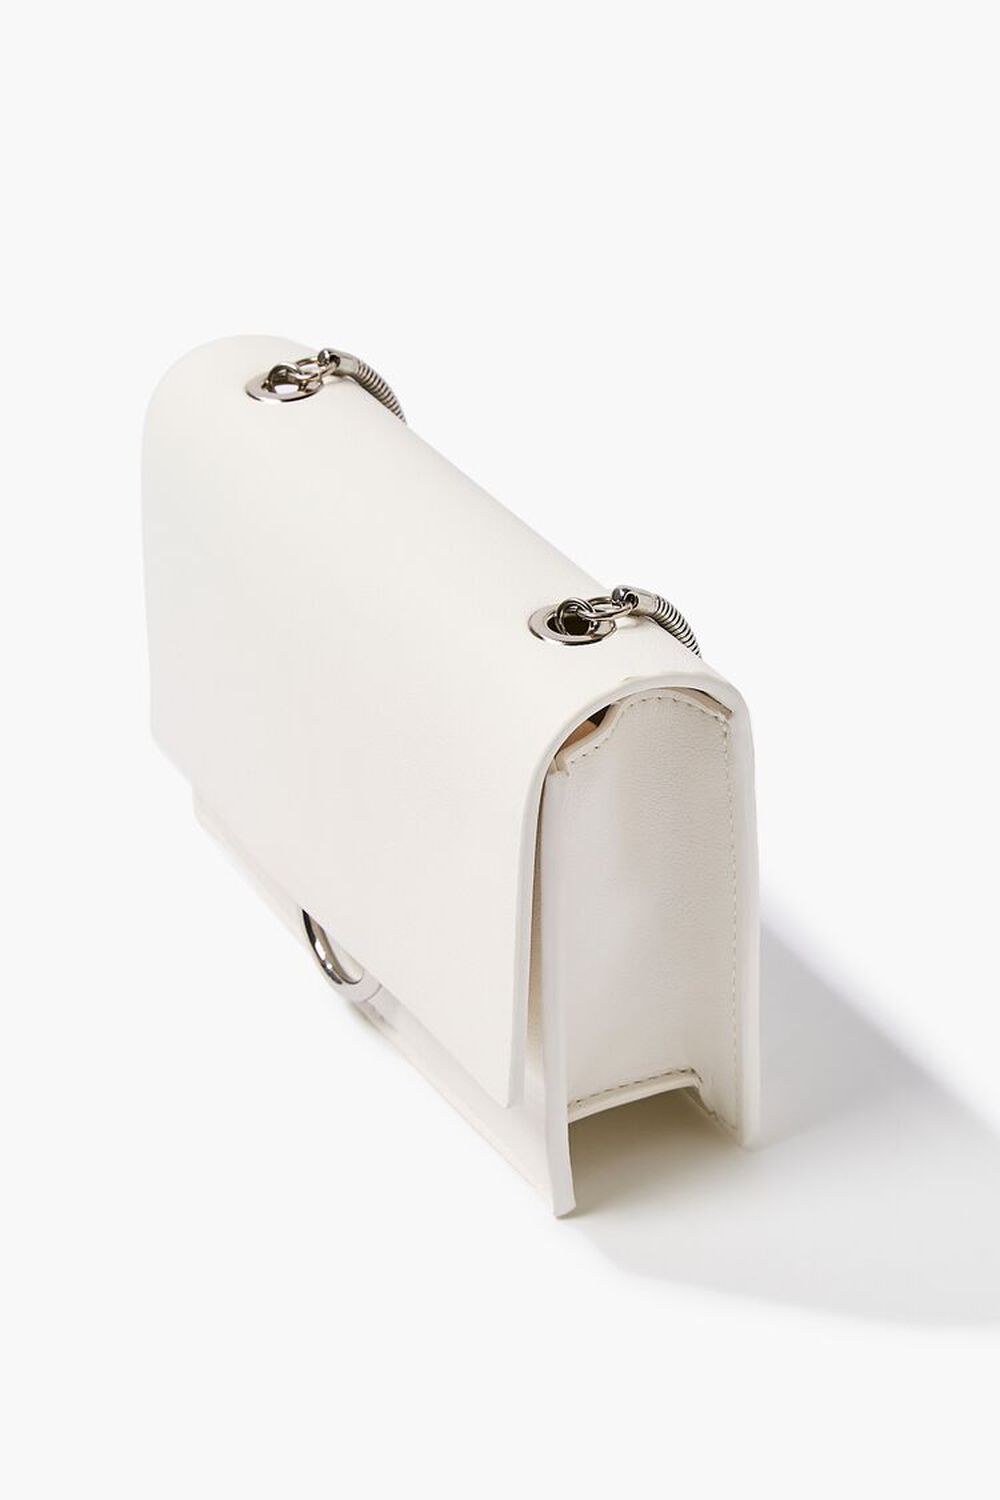 WHITE Faux Leather Chain Crossbody Bag, image 2